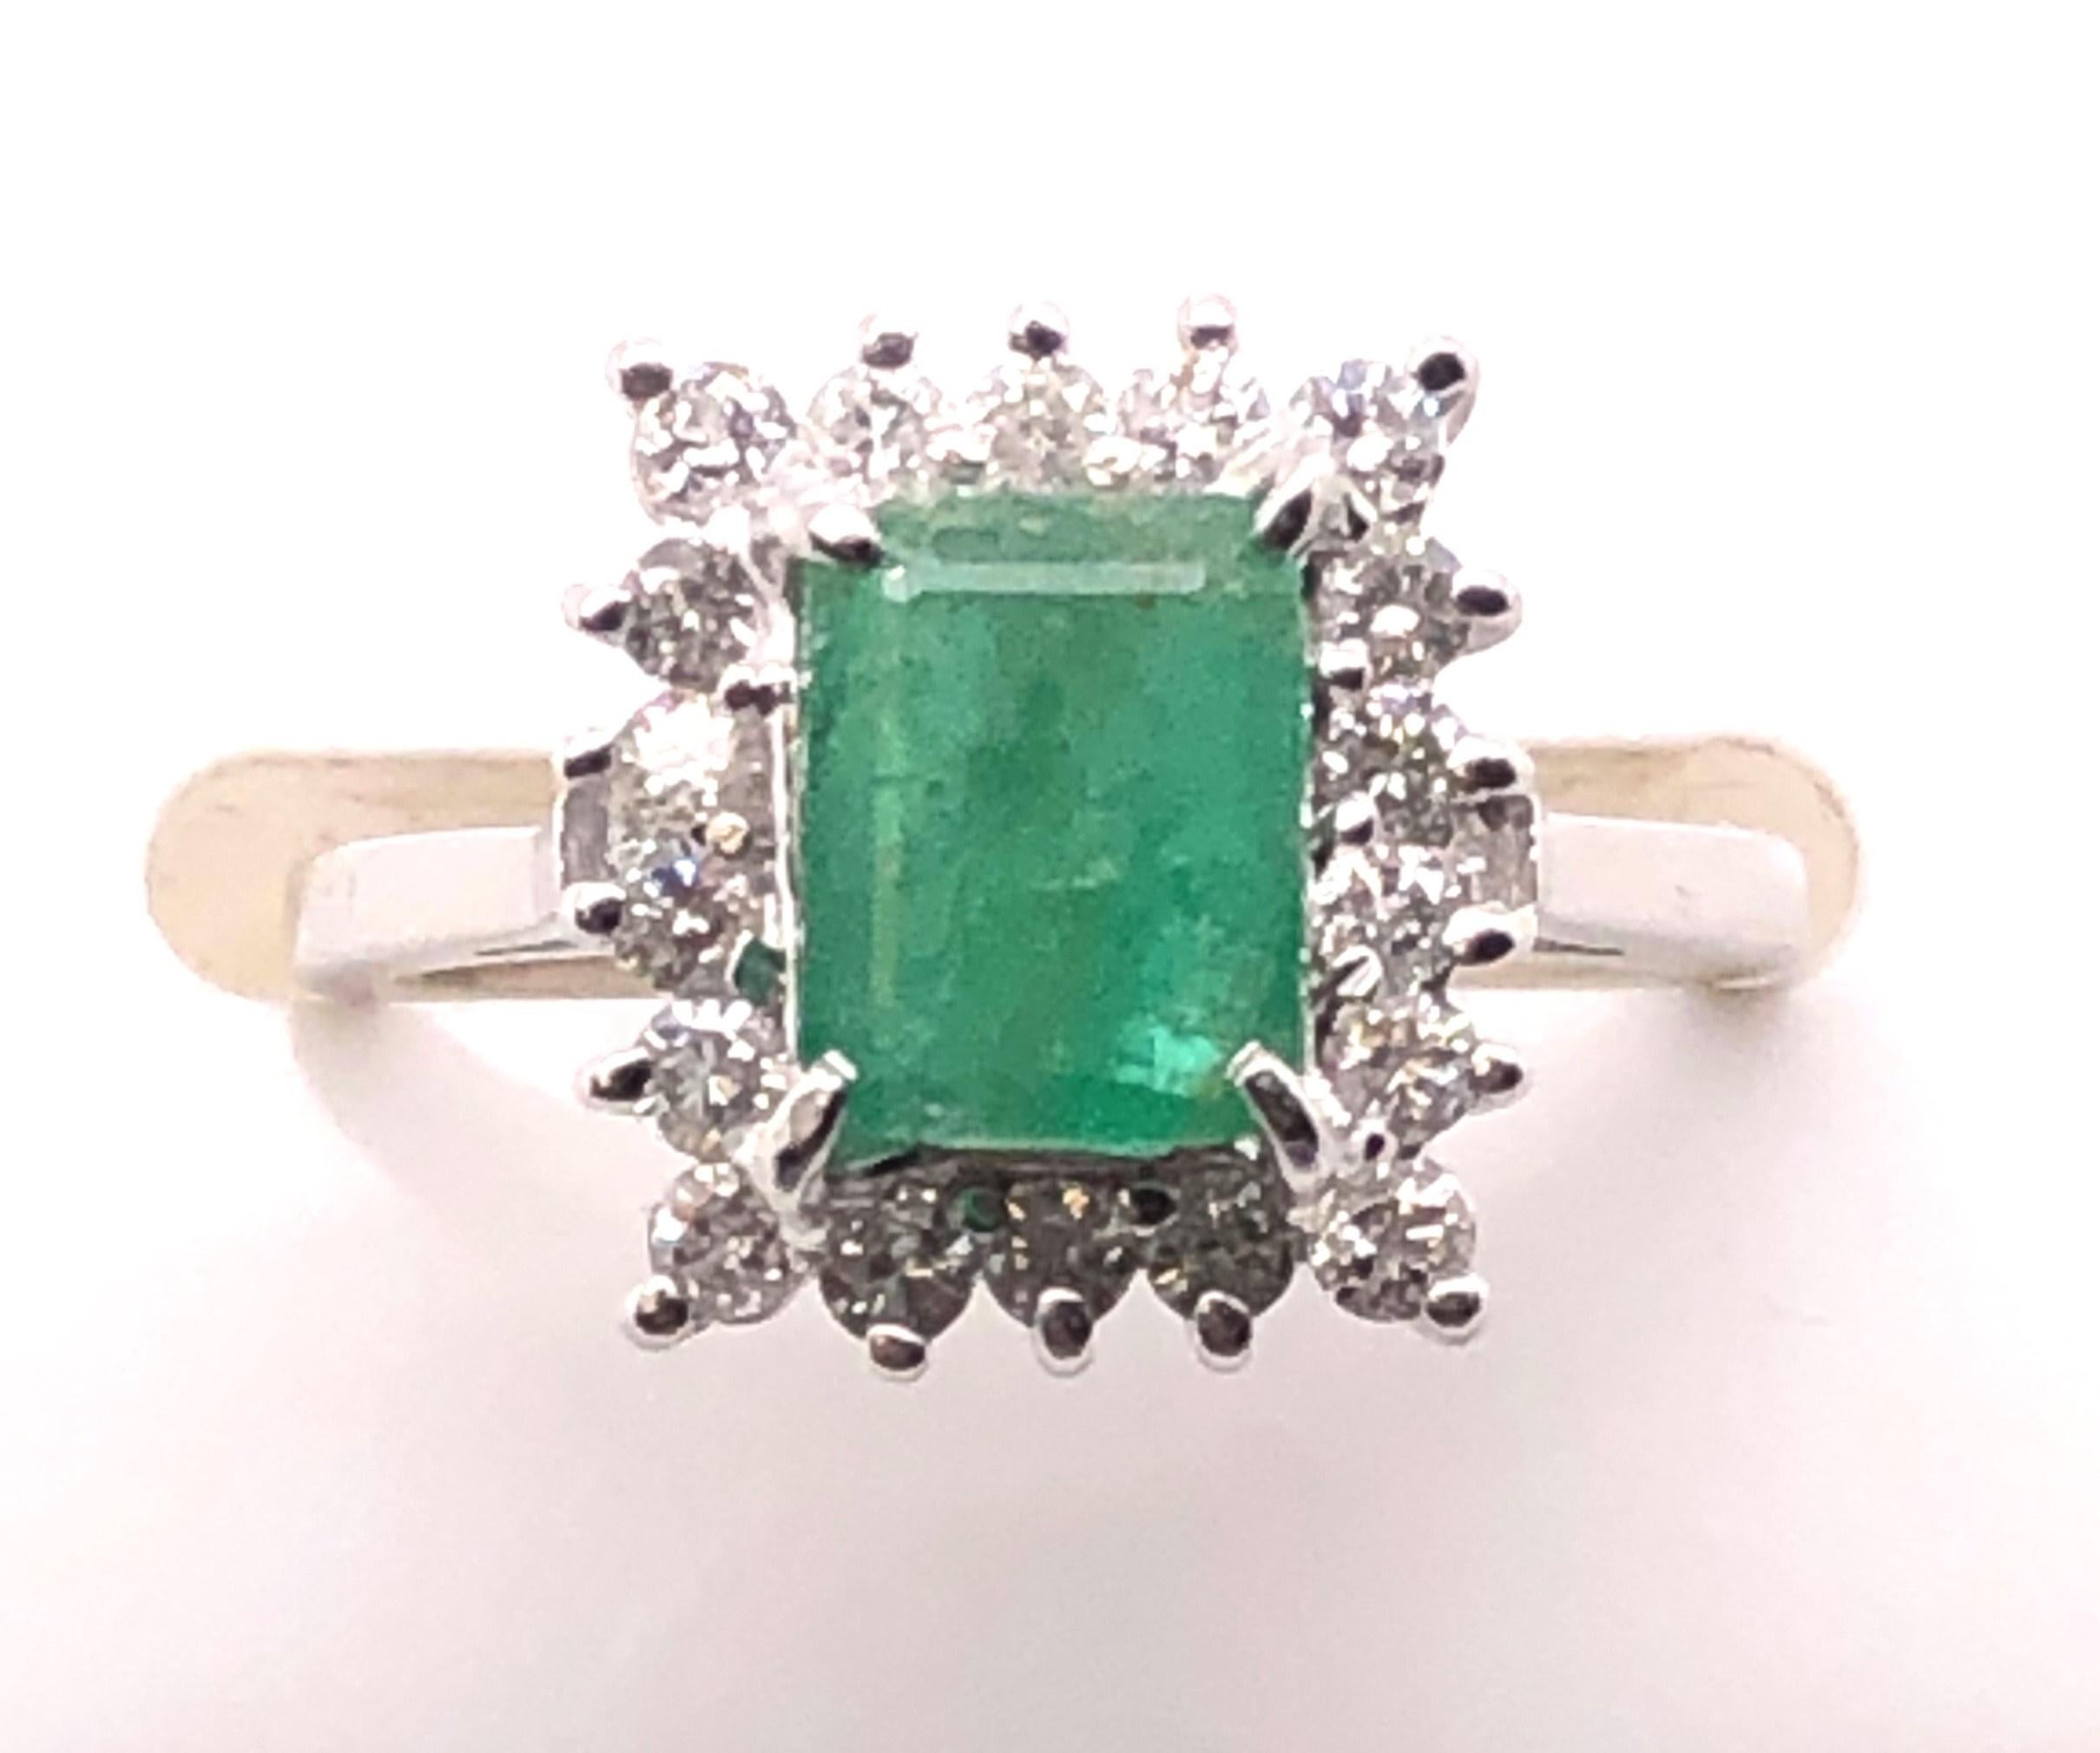 14kt white gold ring with emerald cut 1.42ct Emerald and .54tcw H-I/ I1-I1 Diamond Halo. 

The ring measures just over .25 inches vertically and .50 inch high. The ring is a finger size 6.50 and can be resized. 

This ring sells for $1295 in our